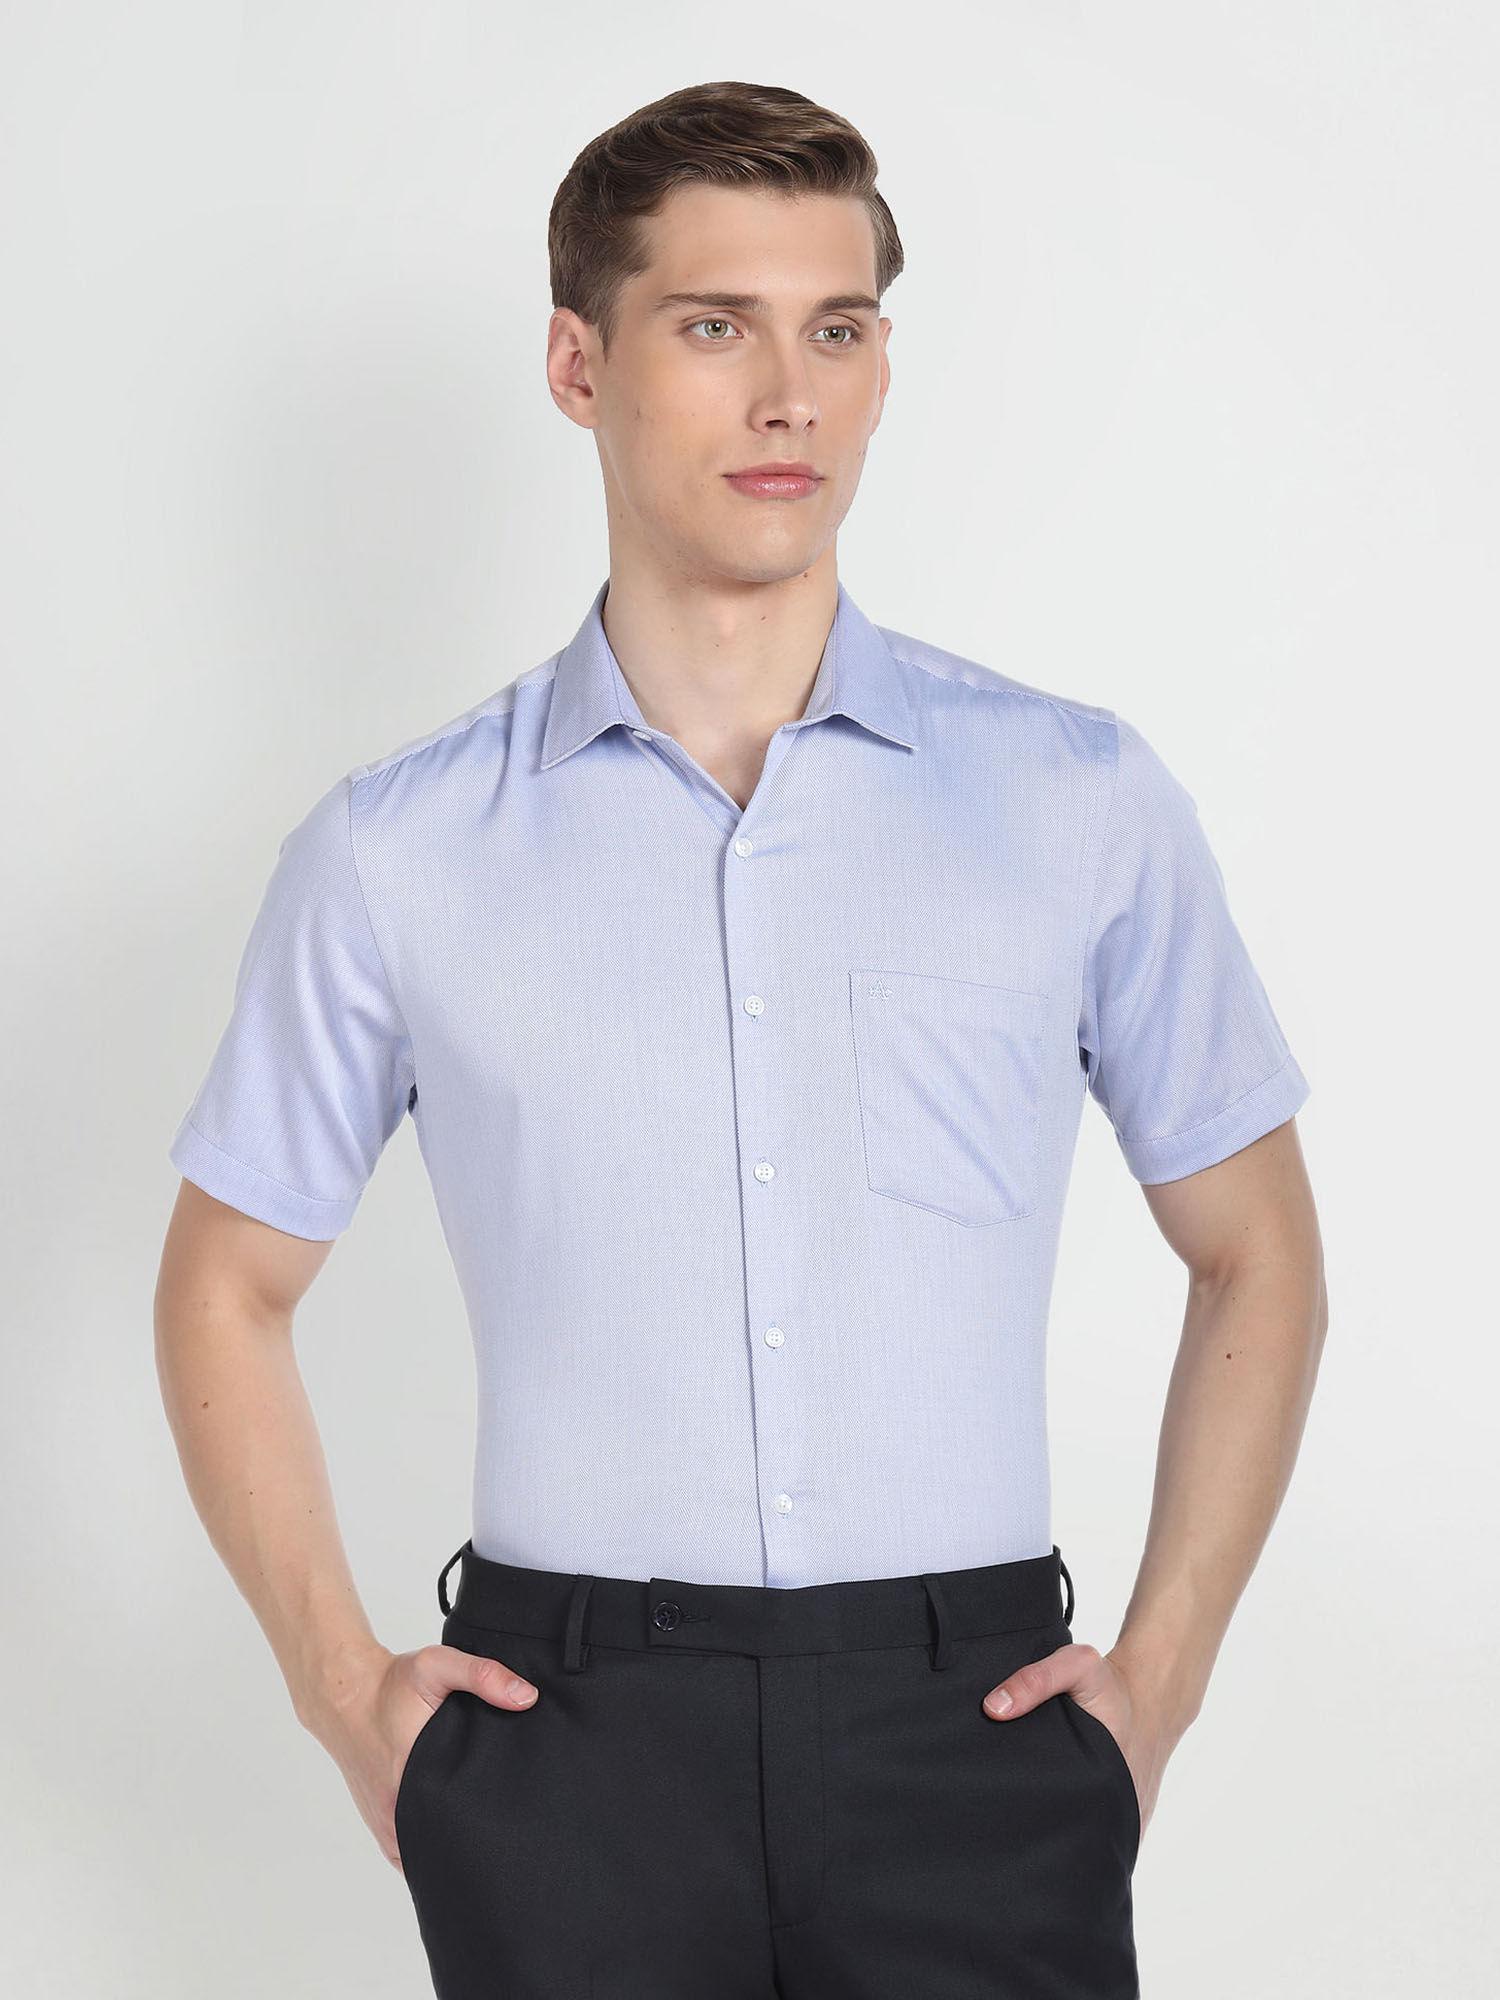 blue-pure-cotton-textured-dobby-formal-shirt